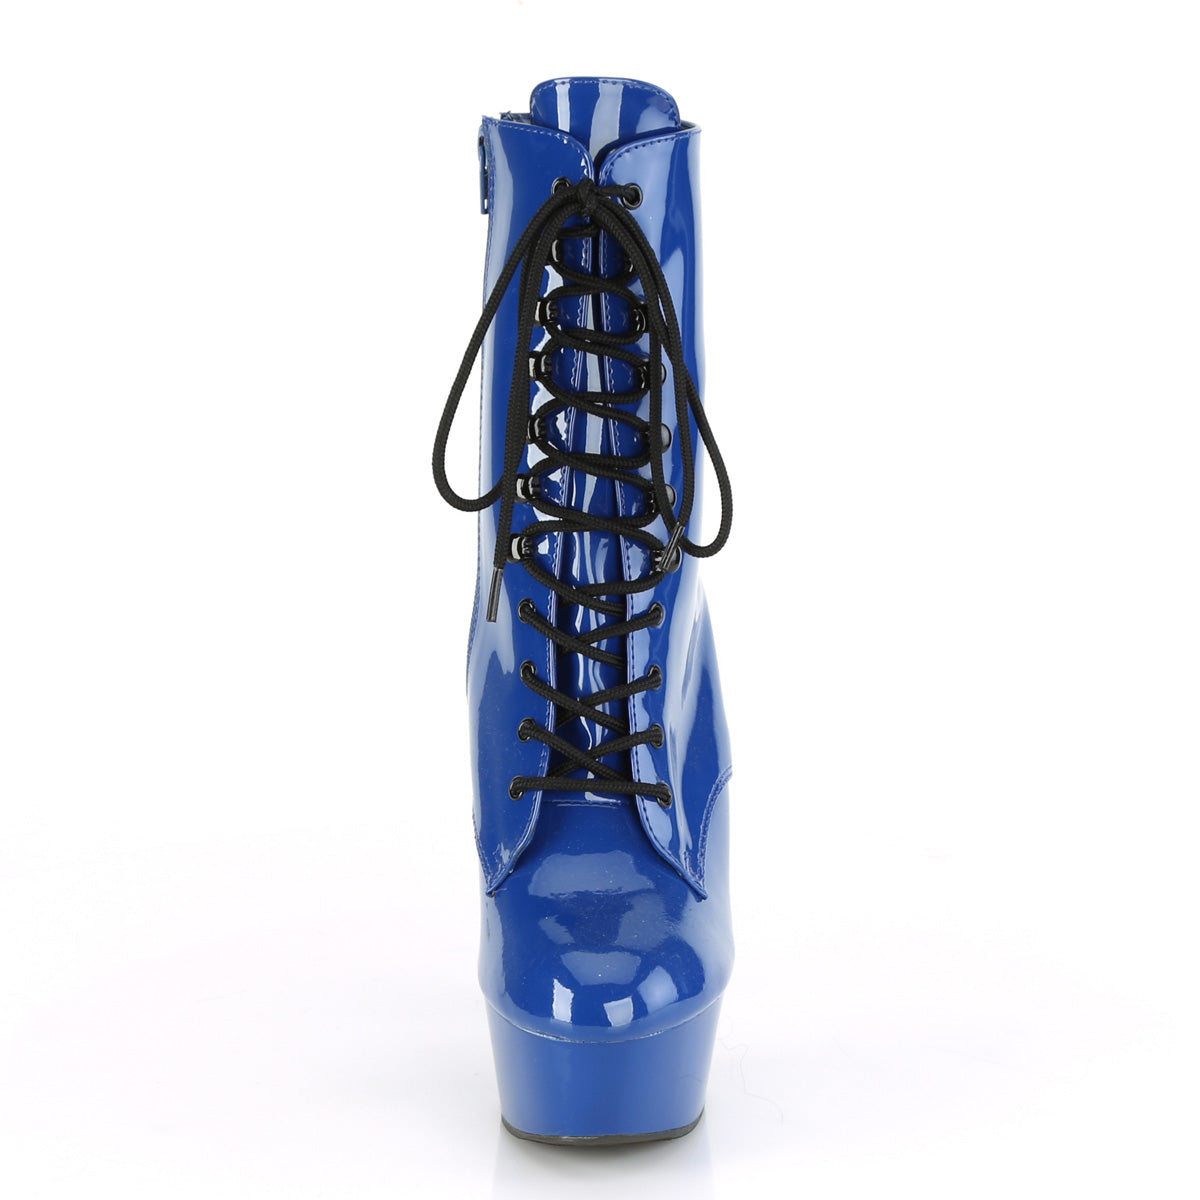 DELIGHT-1020 Pleaser Pole Dancing Shoes Ankle Boots Pleasers - Sexy Shoes Alternative Footwear